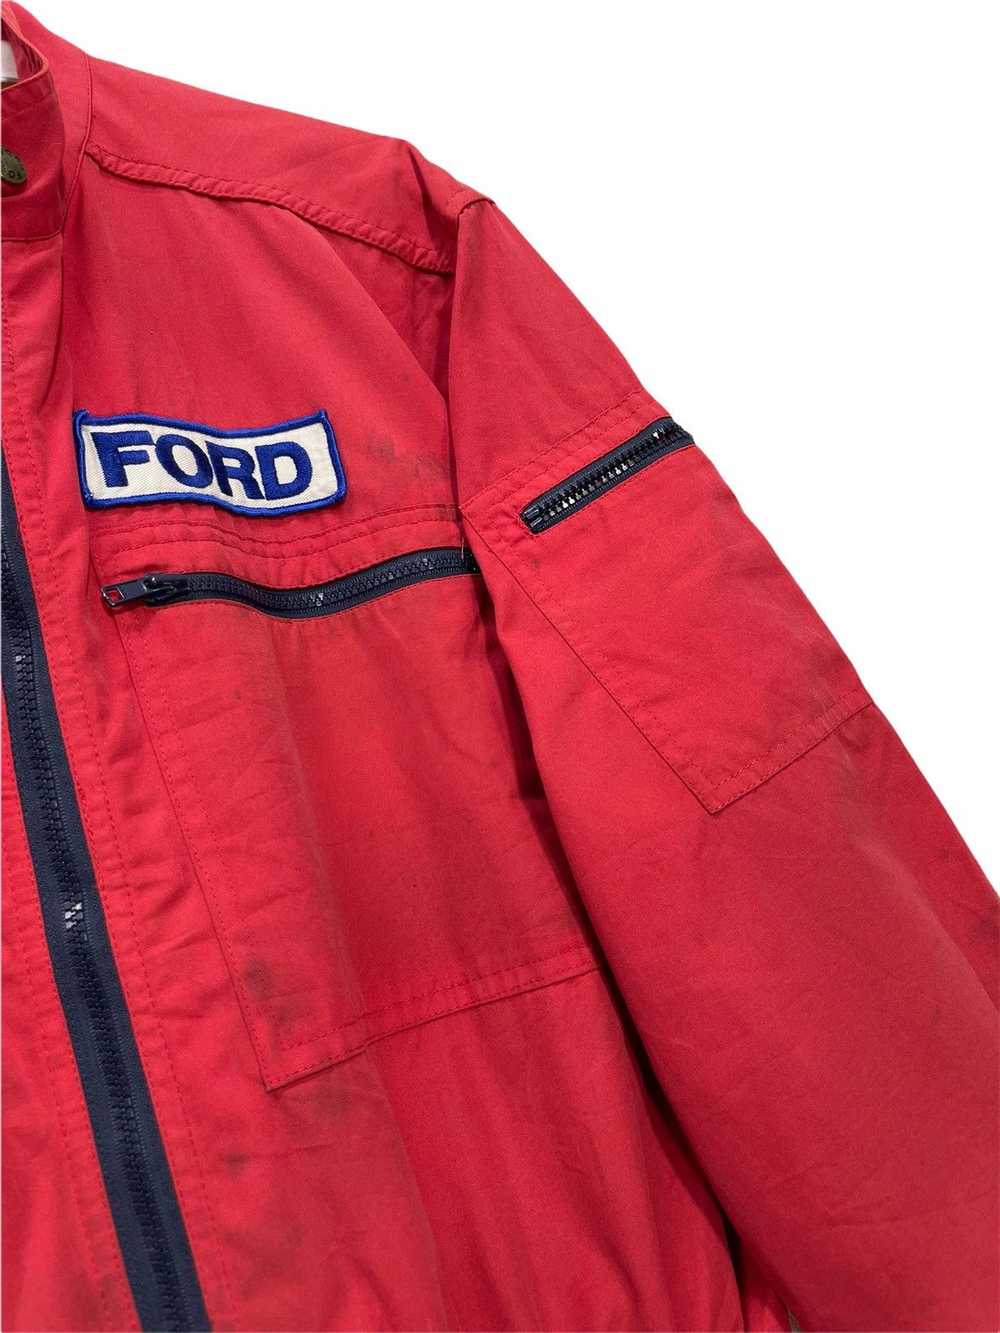 Ford × Japanese Brand × Sports Specialties Vtg 90… - image 9